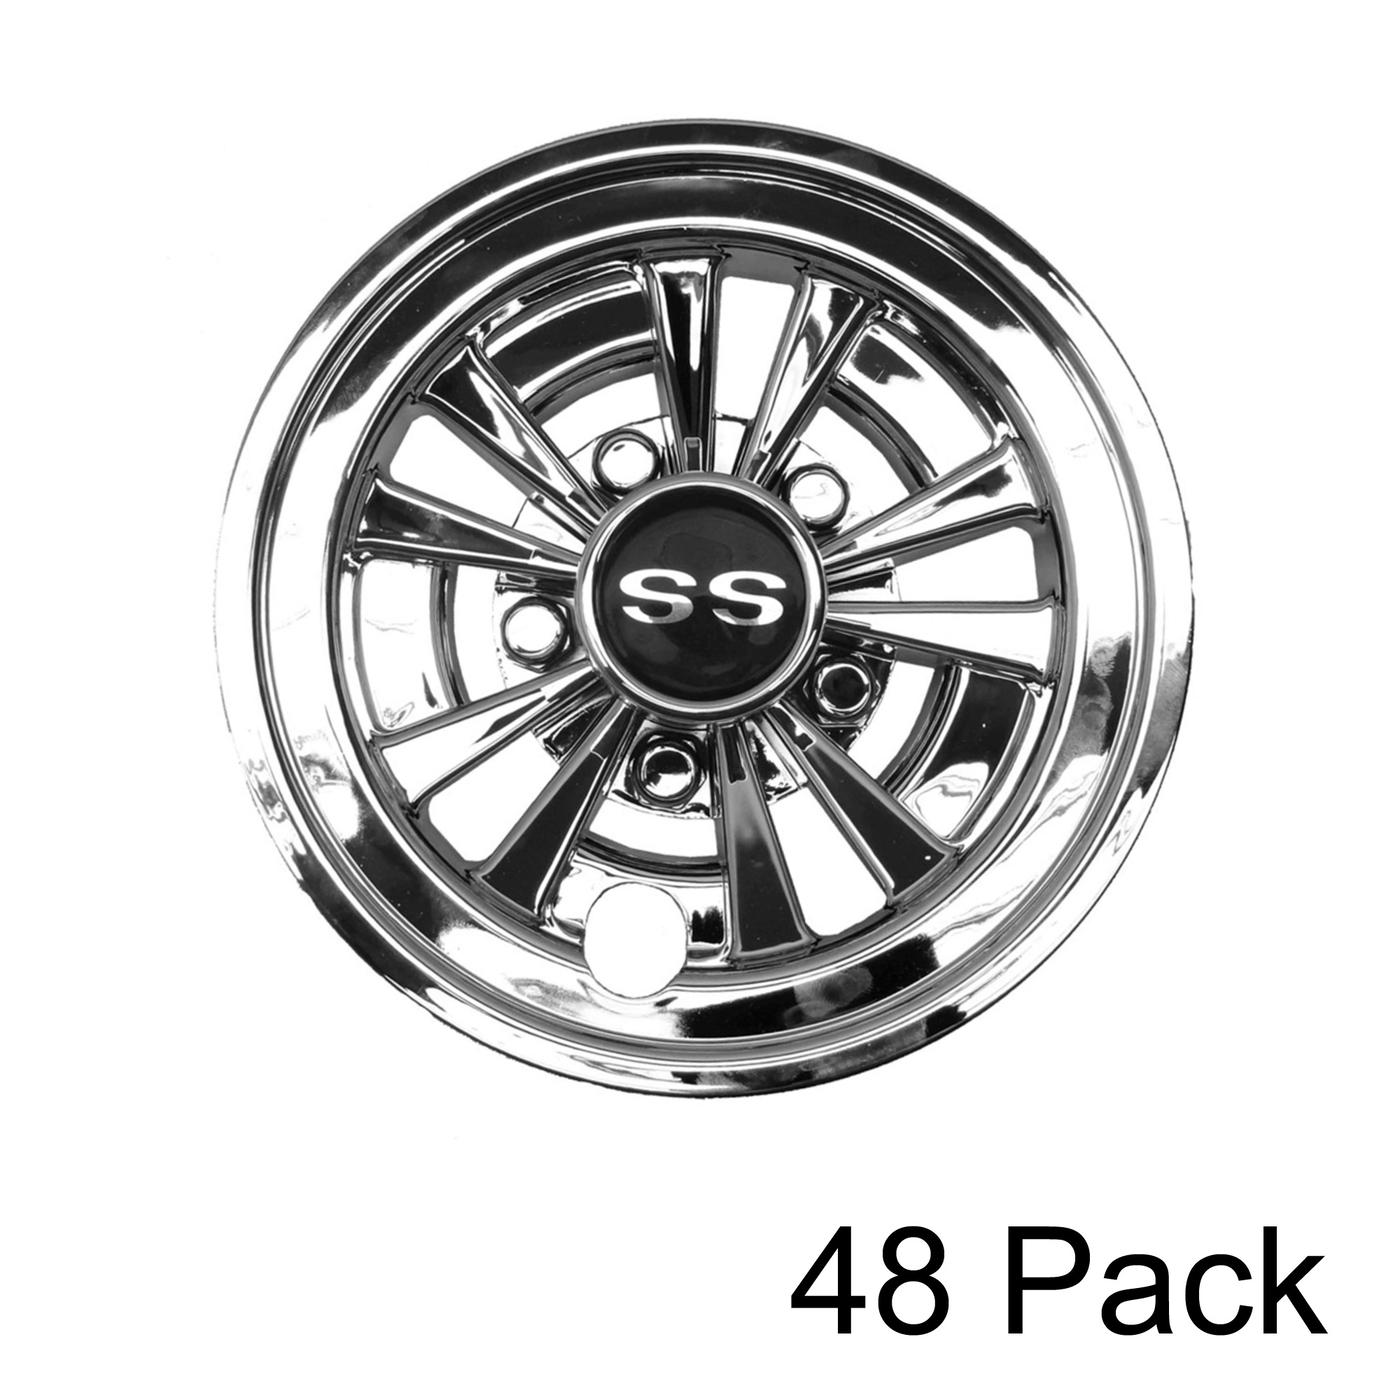 GTW 8 inch Golf Cart Wheel Covers - 48 Pack